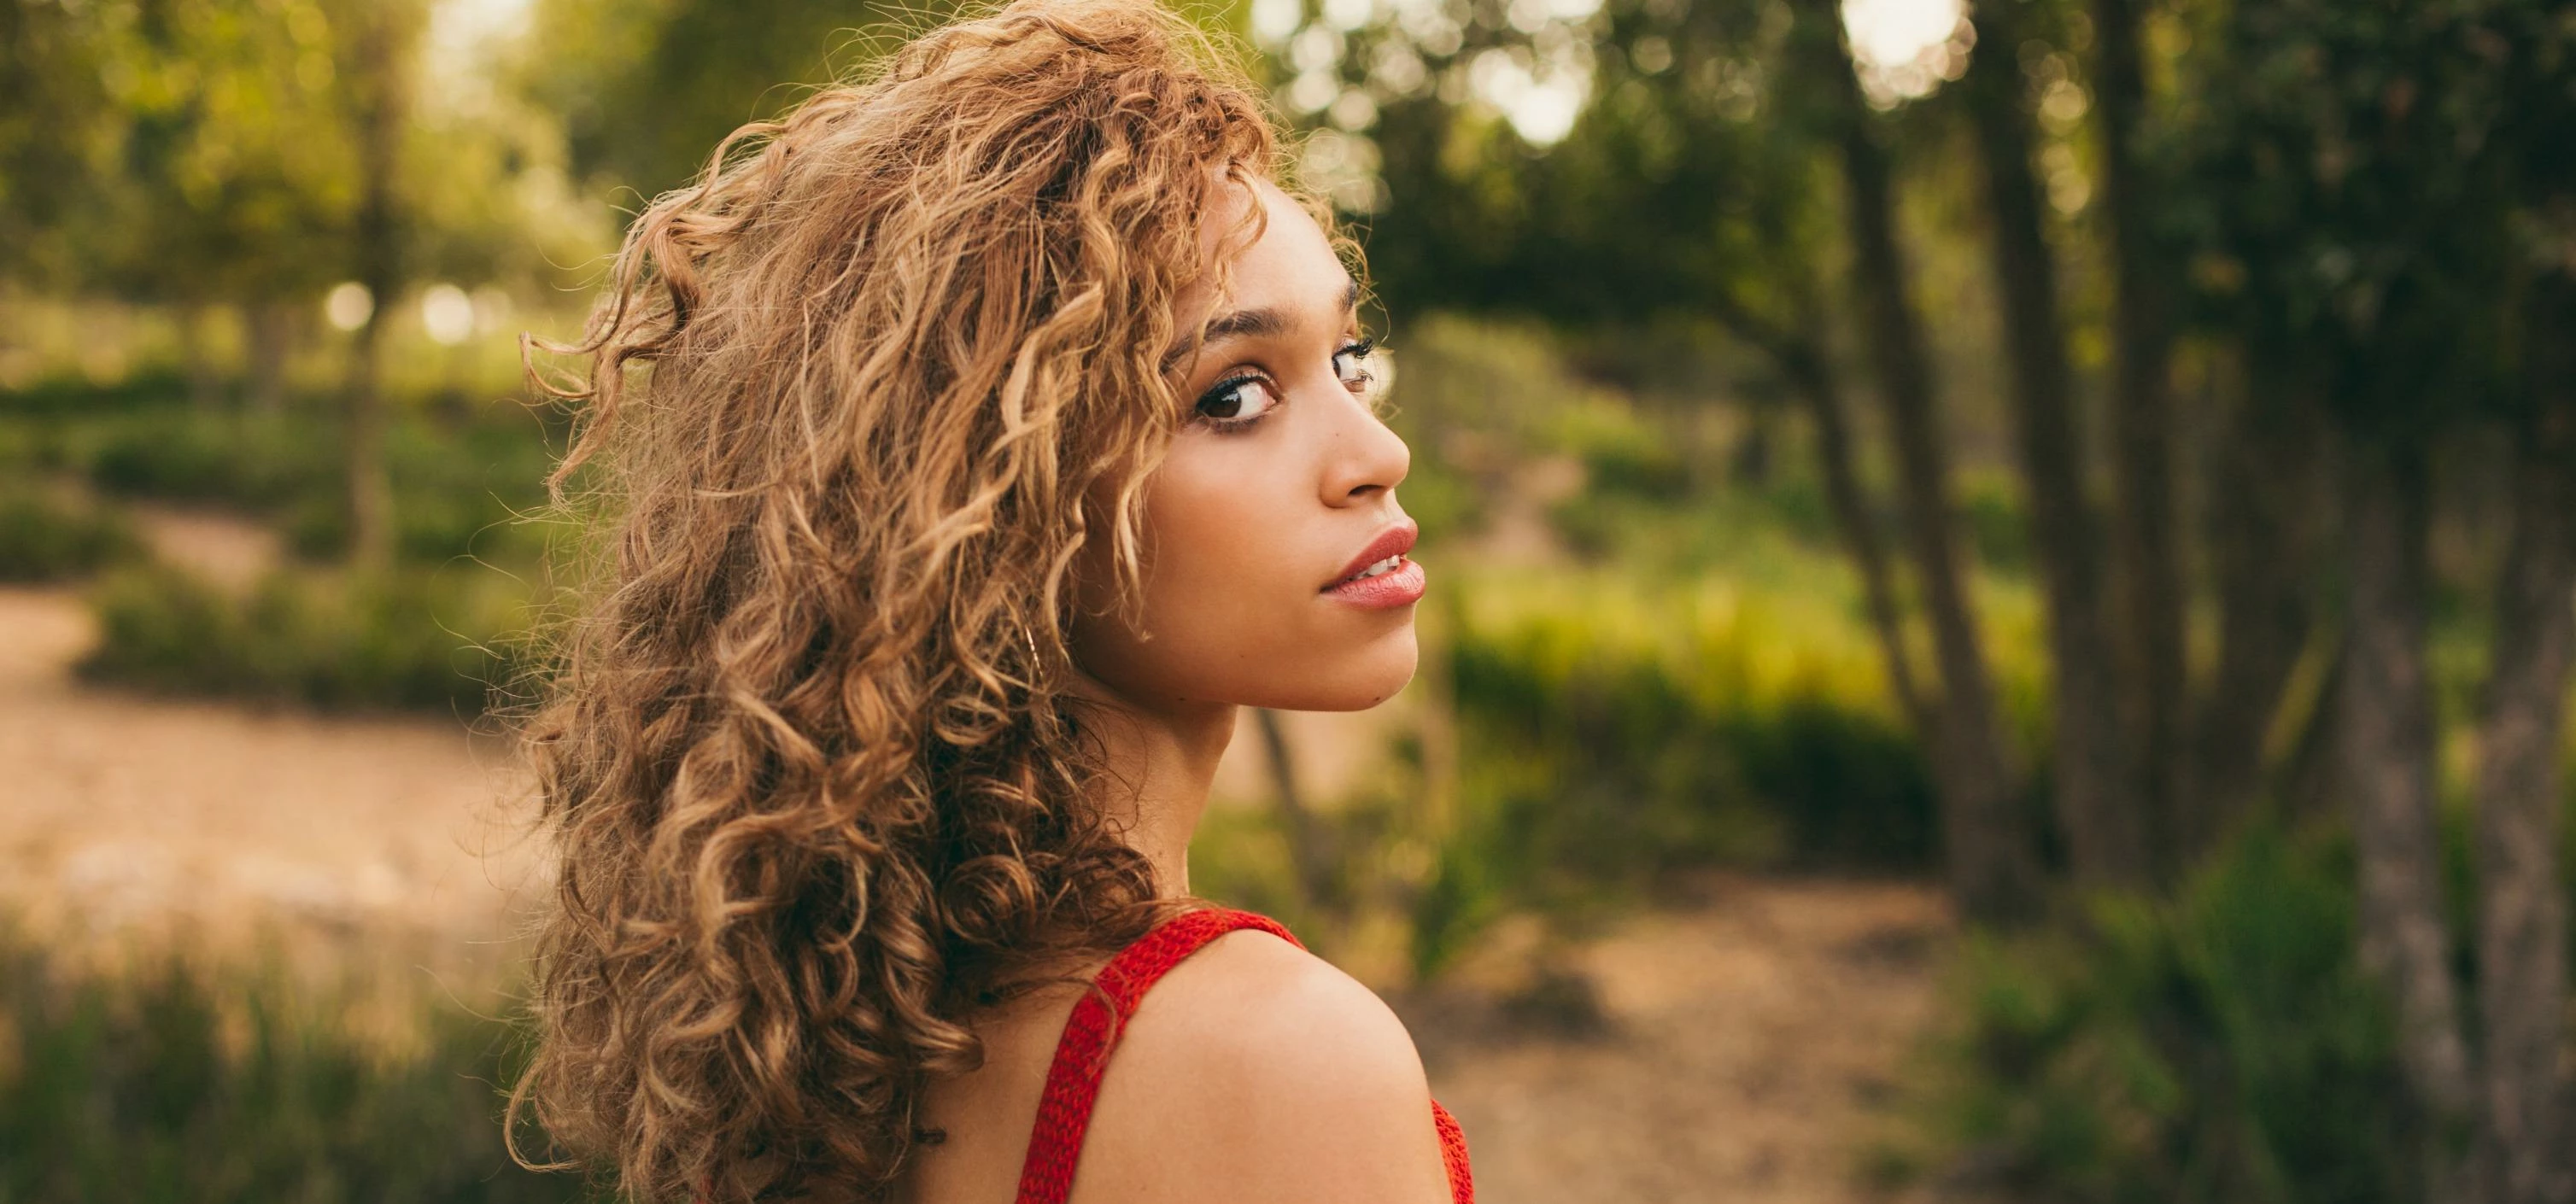 Izzy Bizu will perform alongside Lawson at the awards